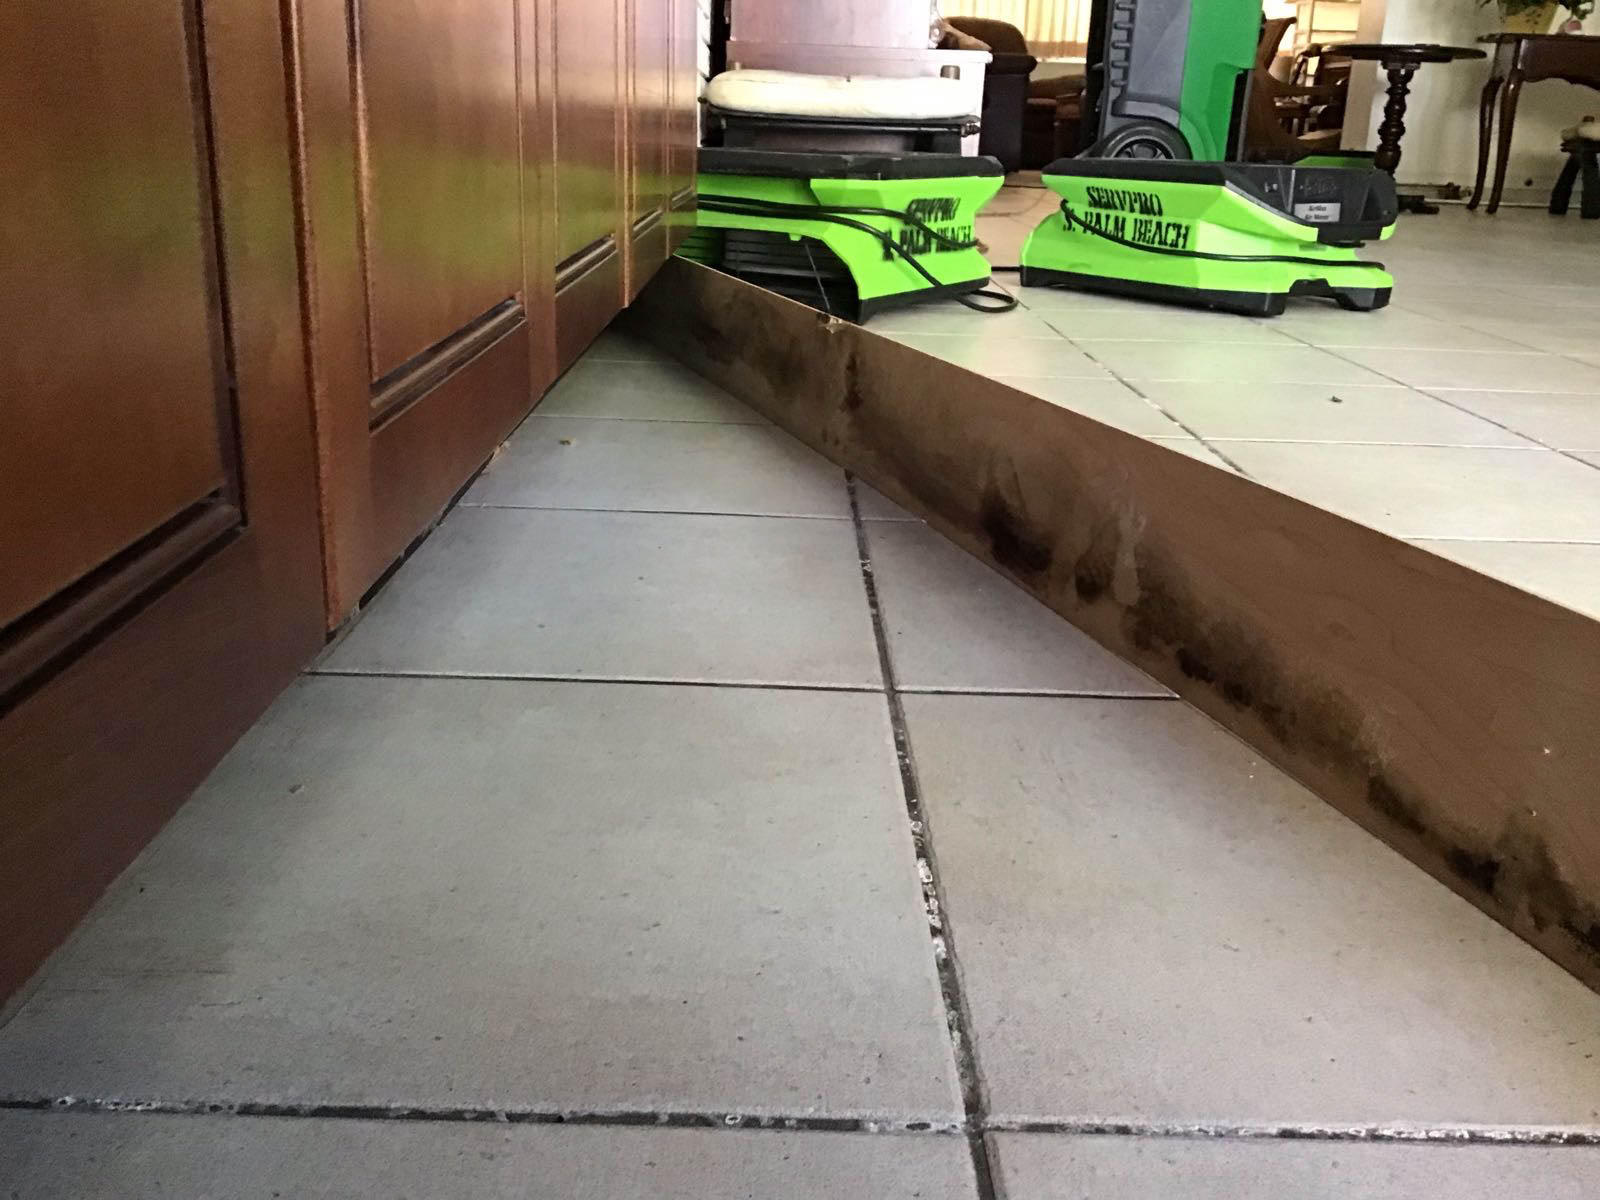 If you suspect mold damage in your Deerfield Beach, FL home or business give SERVPRO of Deerfield Beach a call anytime. We have the expertise and experience to handle any size mold emergency. We are open 365 days a year.